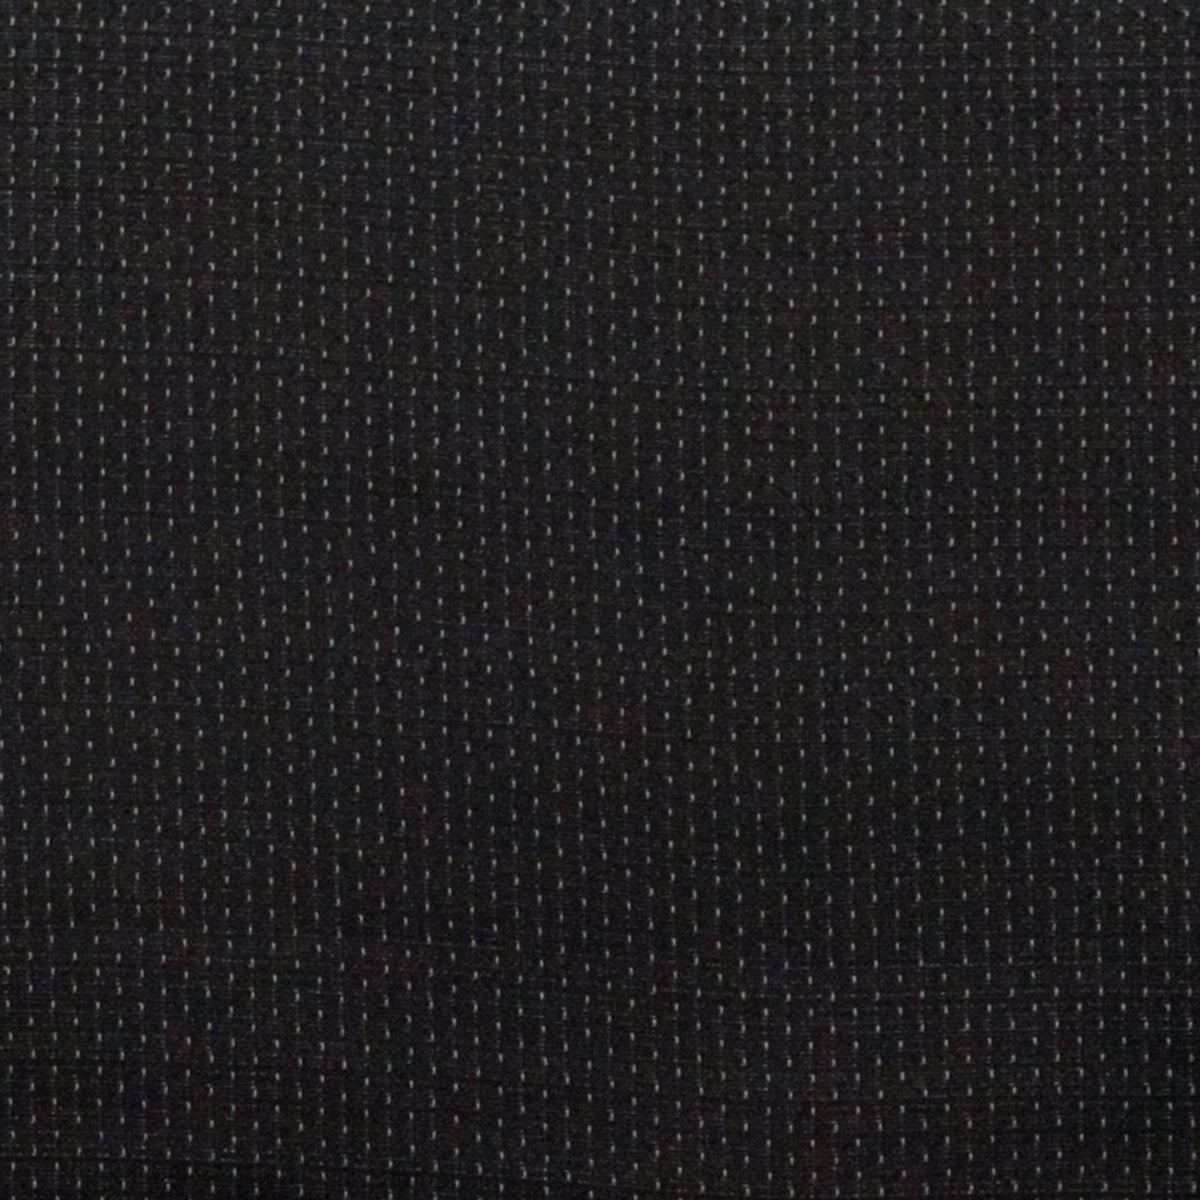 Black Patterned Fabric |#| Heavy Duty Black Dot Fabric Stack Chair with Arms - Reception Furniture